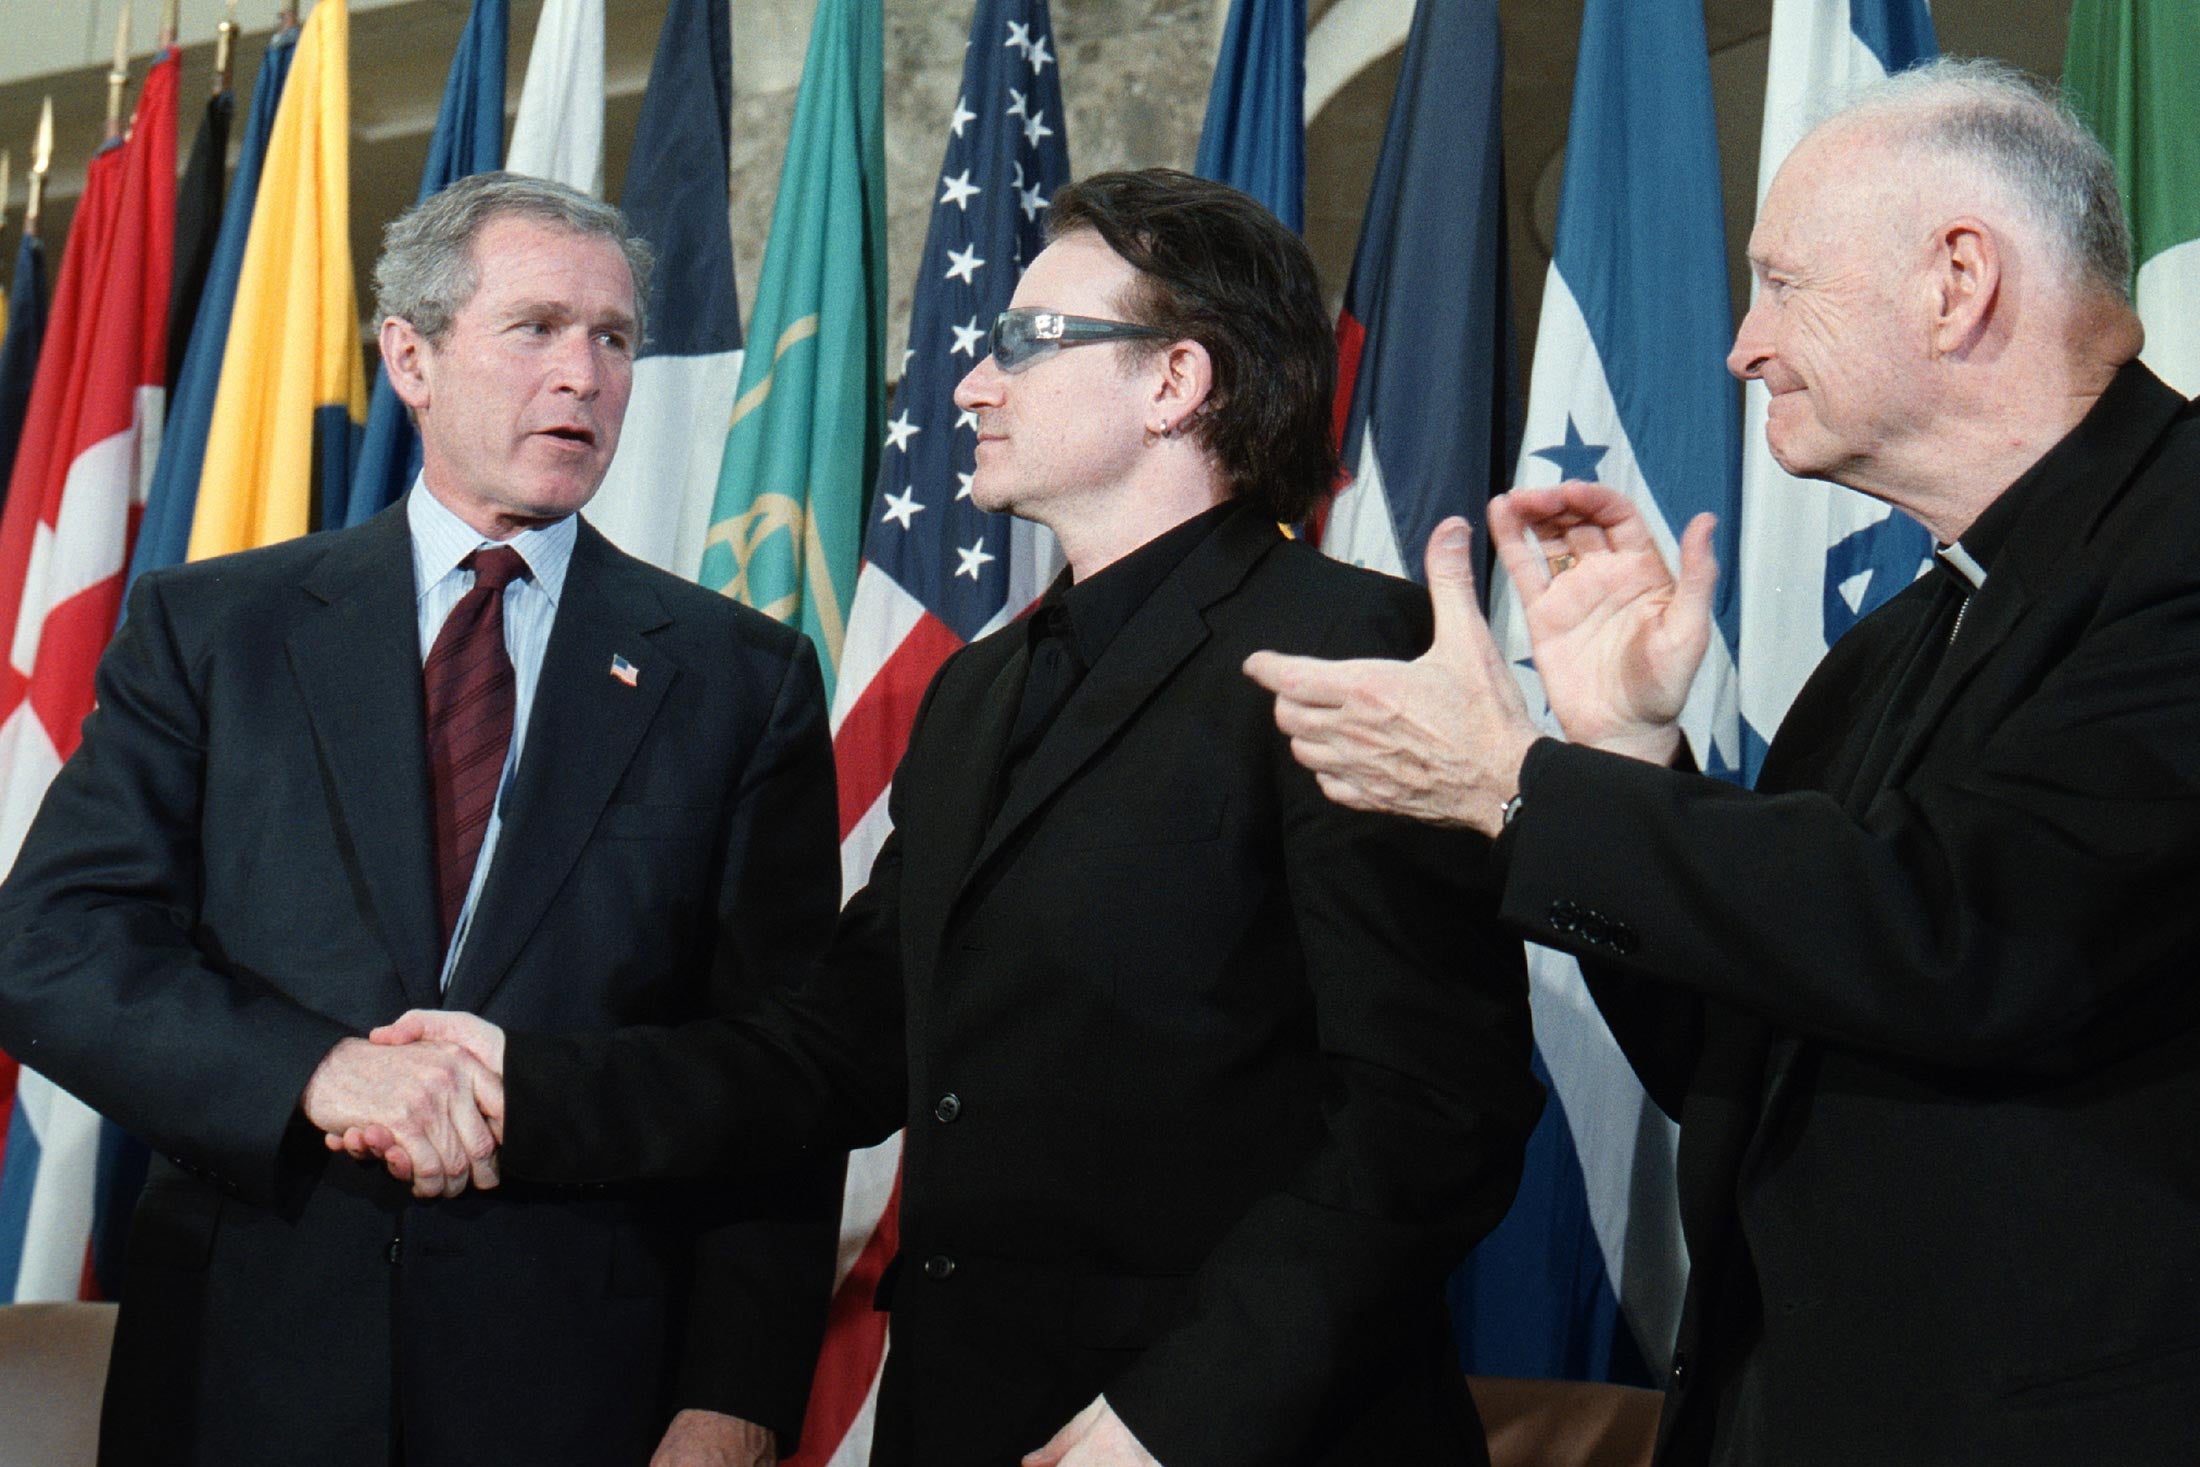 George W. Bush shaking hands with Bono, as Theodore McCarrick looks on, applauding.